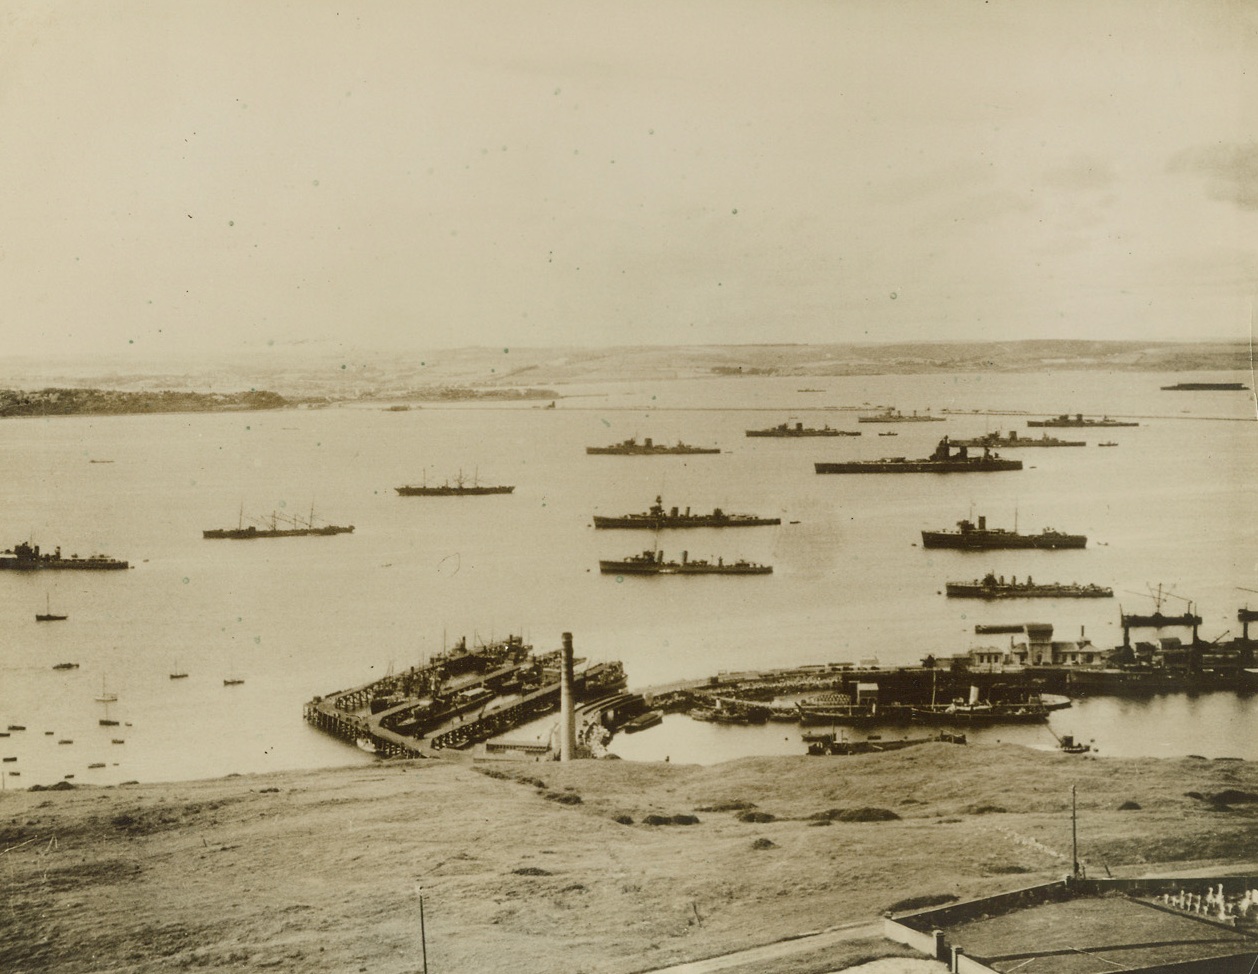 Target of Nazi Aerial Blitzkrieg, 8/11/1940  Portland, England – View of the harbor of Portland, England, showing warships anchored in naval drydock (foreground). Portland was the objective of fiercest aerial bombardment of the war on August 11, when wave after wave of Nazi bombers, accompanied by fleets of fighting planes, rained their deadly loads on the harbor works and anchored ships, doing tremendous damage, according to Berlin statement. The attack on Portland was part of the aerial blitzkrieg against other British ports.;